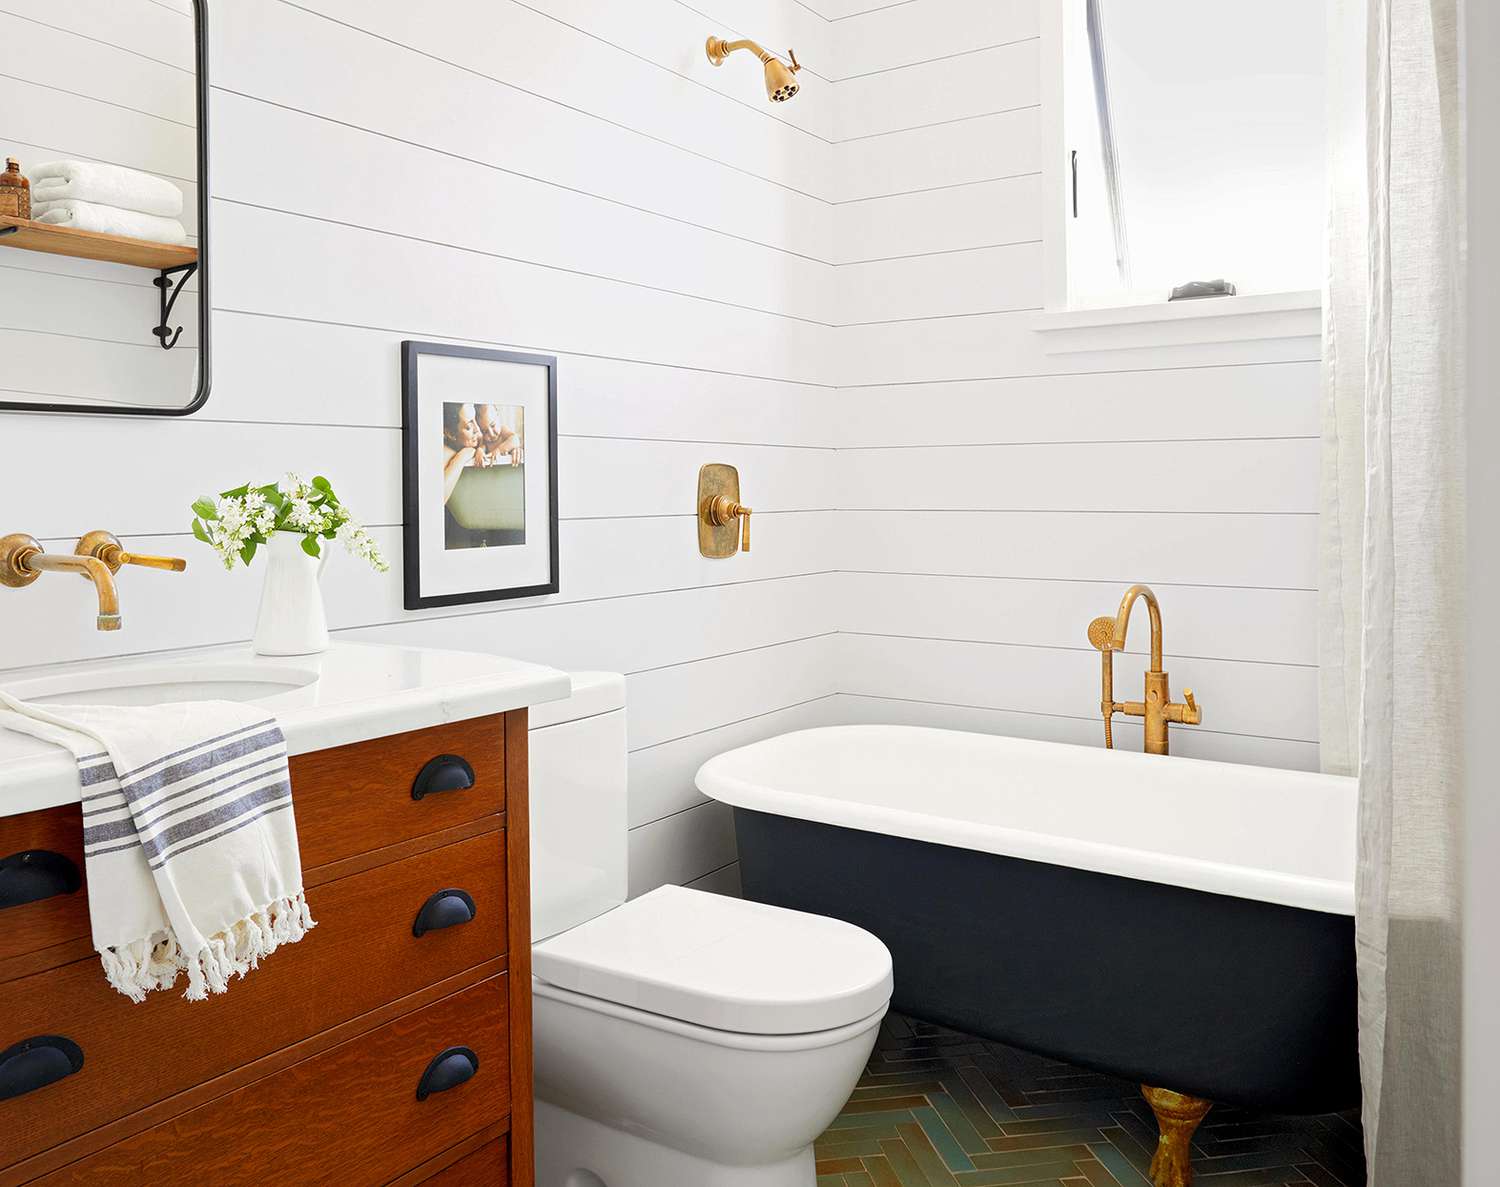 What To Know Before Converting Your Tub To A Shower Better Homes Gardens